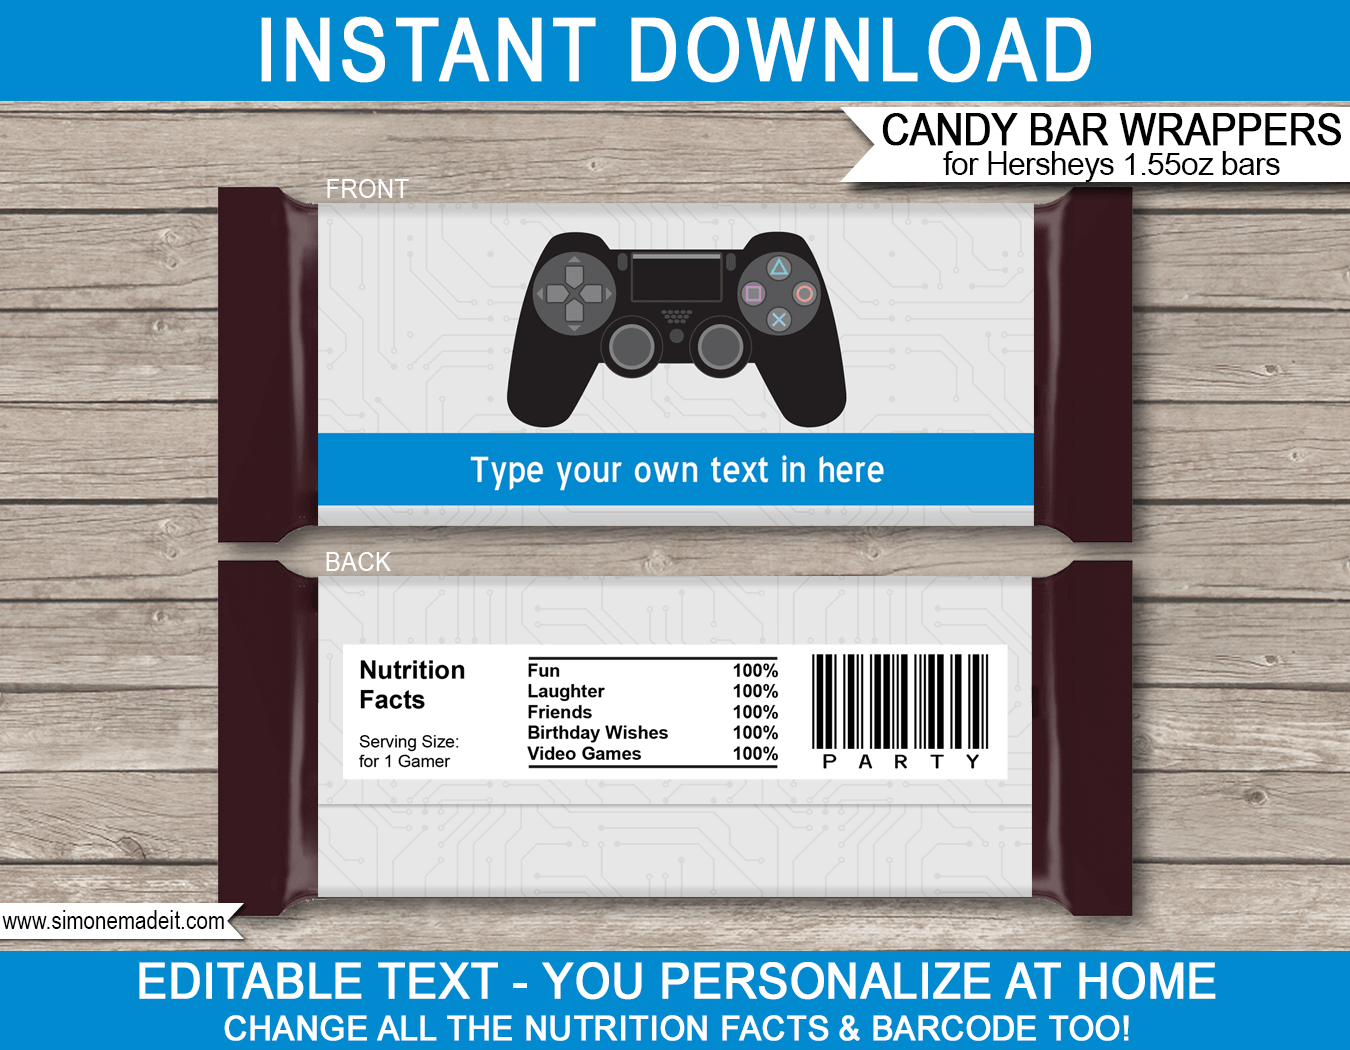 Printable Playstation Birthday Party Candy Bar Wrappers | Birthday Party Favors | Personalized Hershey Candy Bars | Editable Template | INSTANT DOWNLOAD $3.00 via simonemadeit.com